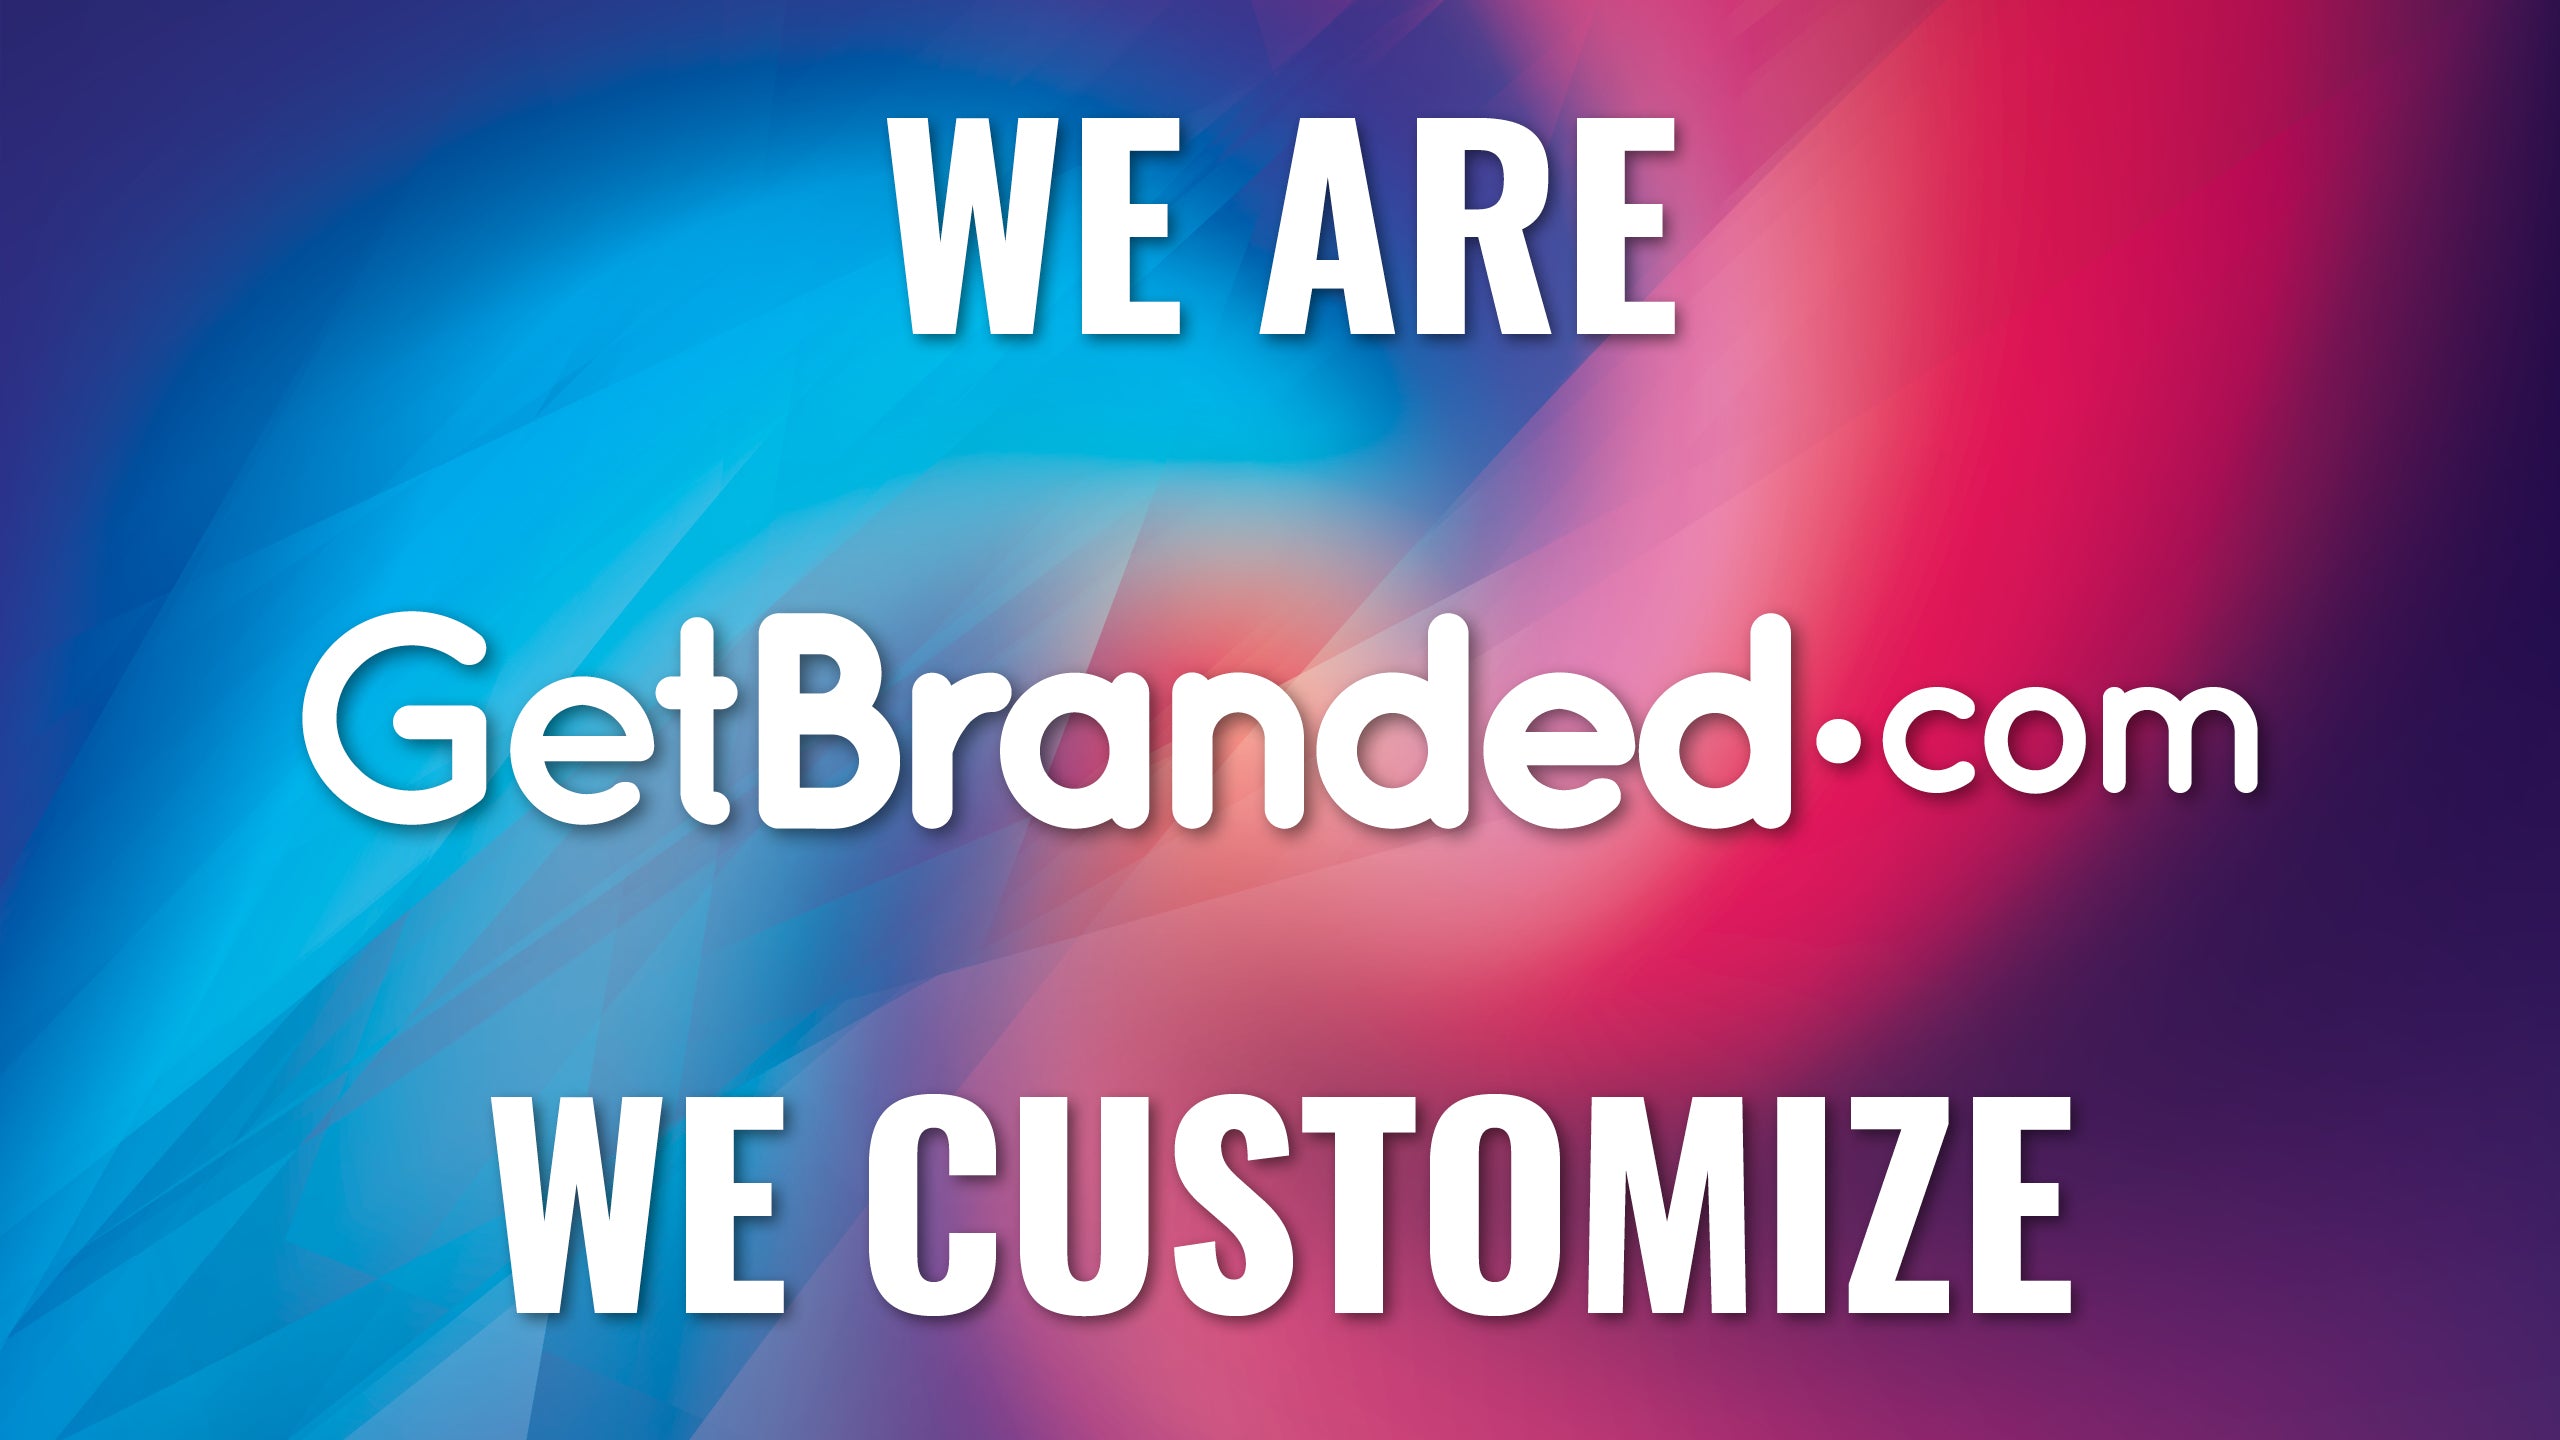 Load video: GetBranded Creative Services Video